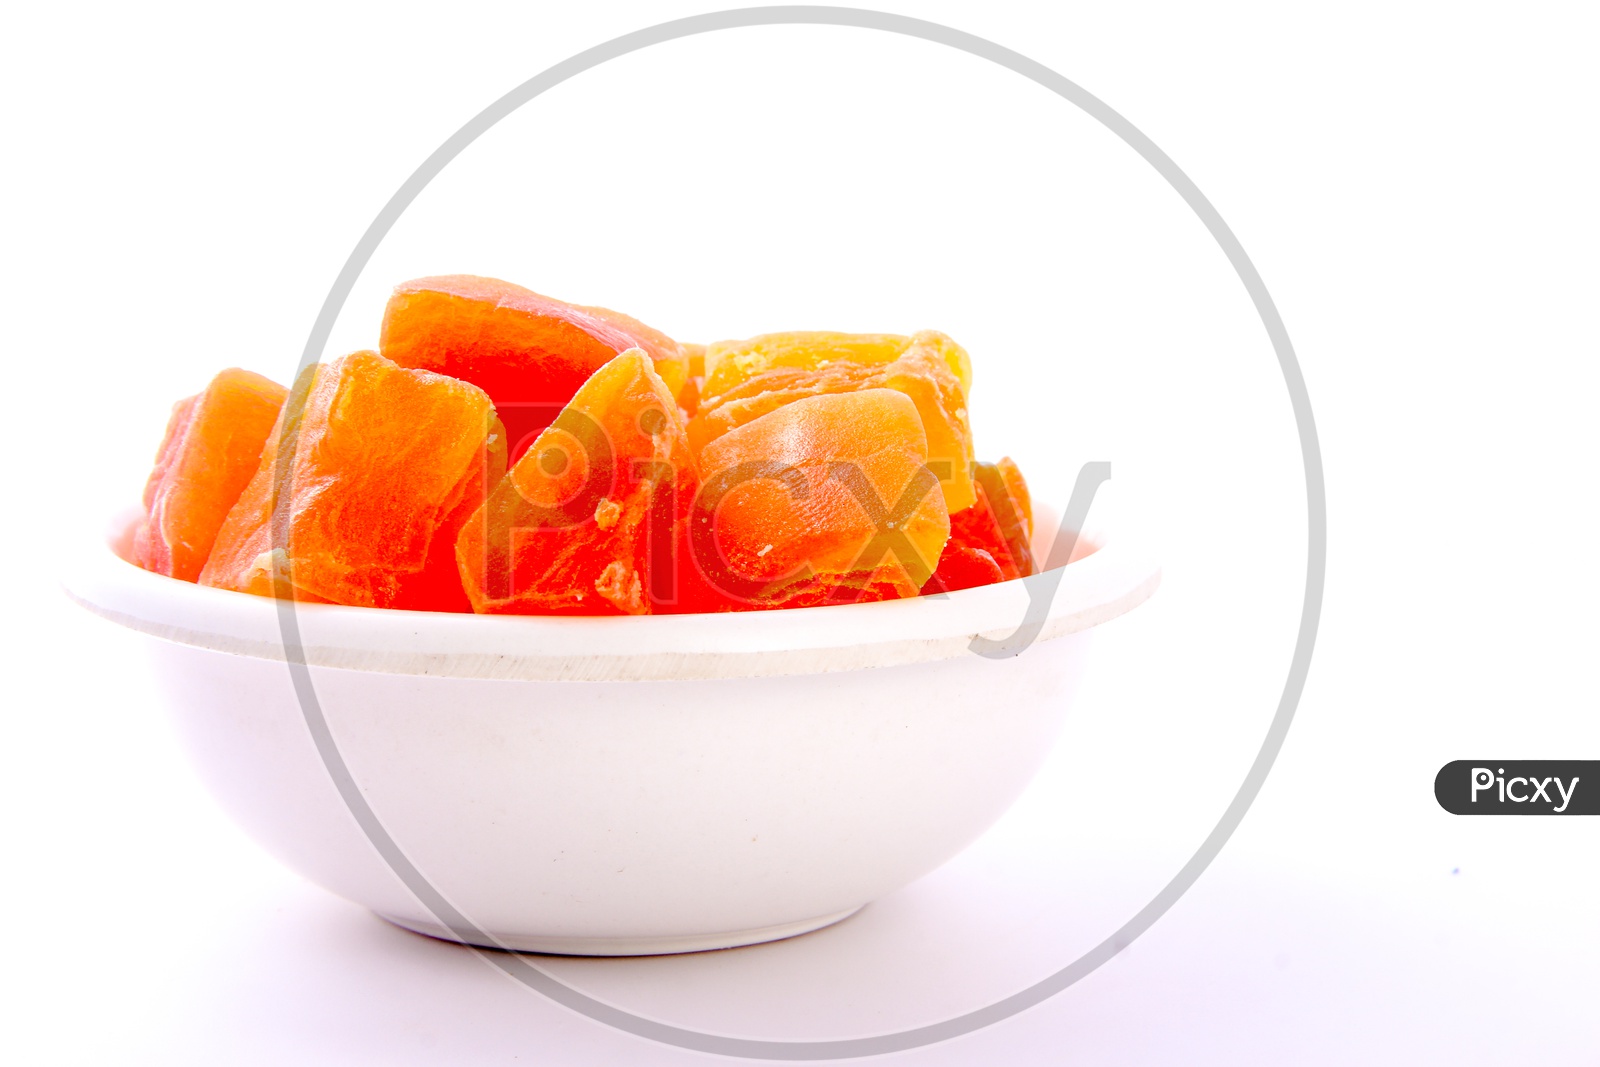 Dry Fruits / Berries in a Bowl On an Isolated White Background